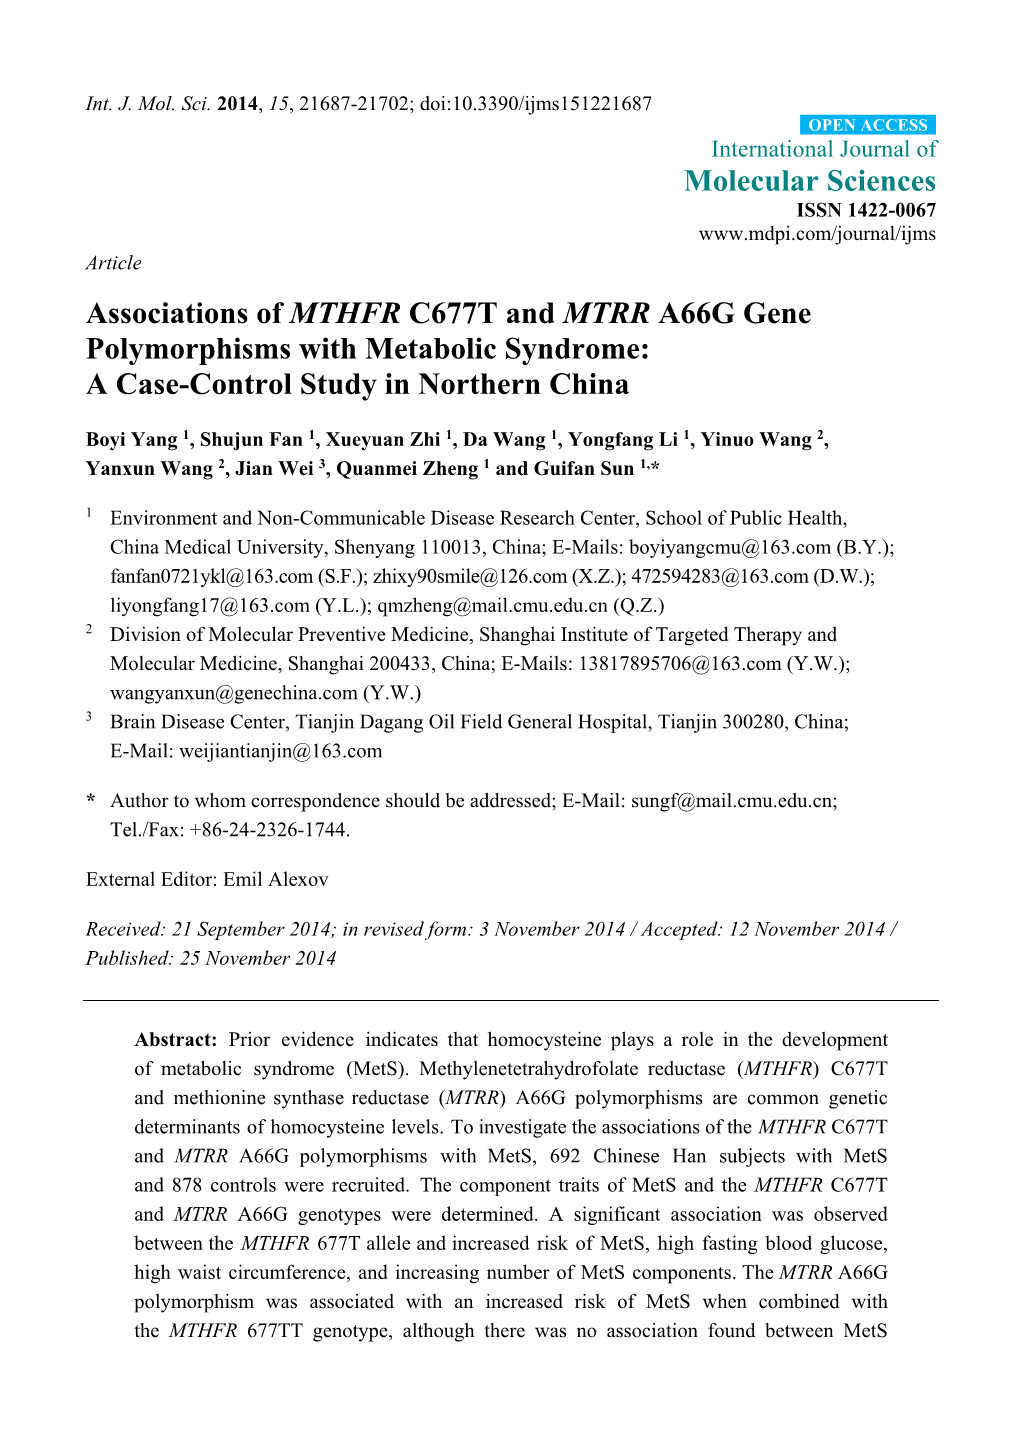 Associations of MTHFR C677T and MTRR A66G Gene Polymorphisms with Metabolic Syndrome: a Case-Control Study in Northern China